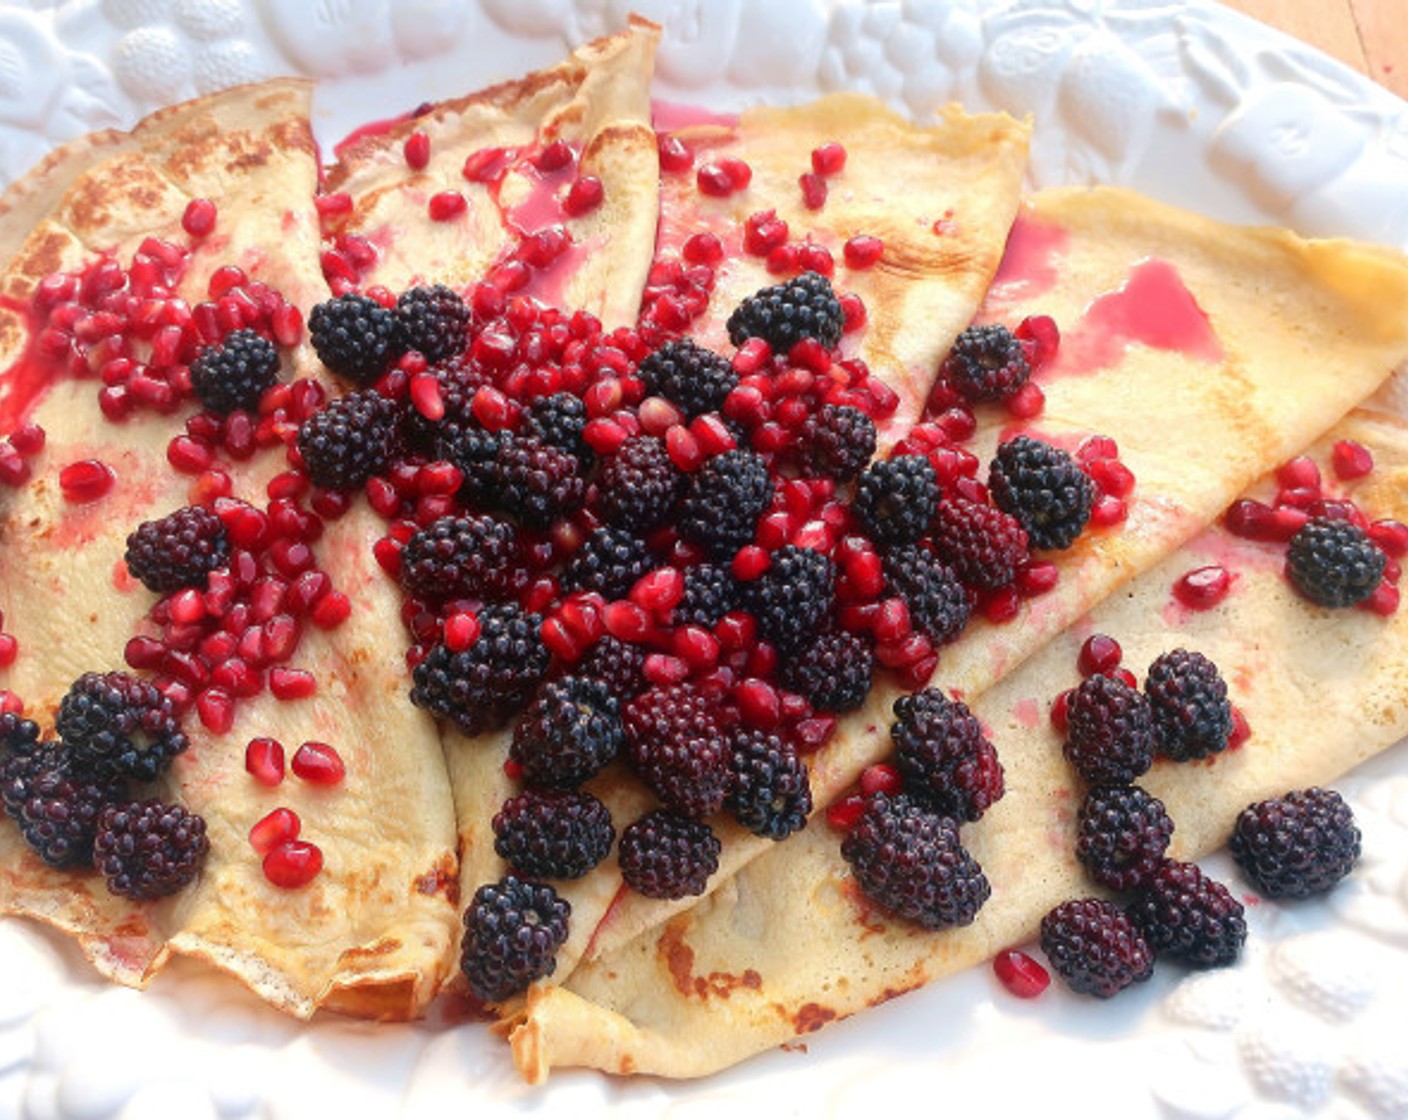 step 7 Top the crepes with the caramelized berries.